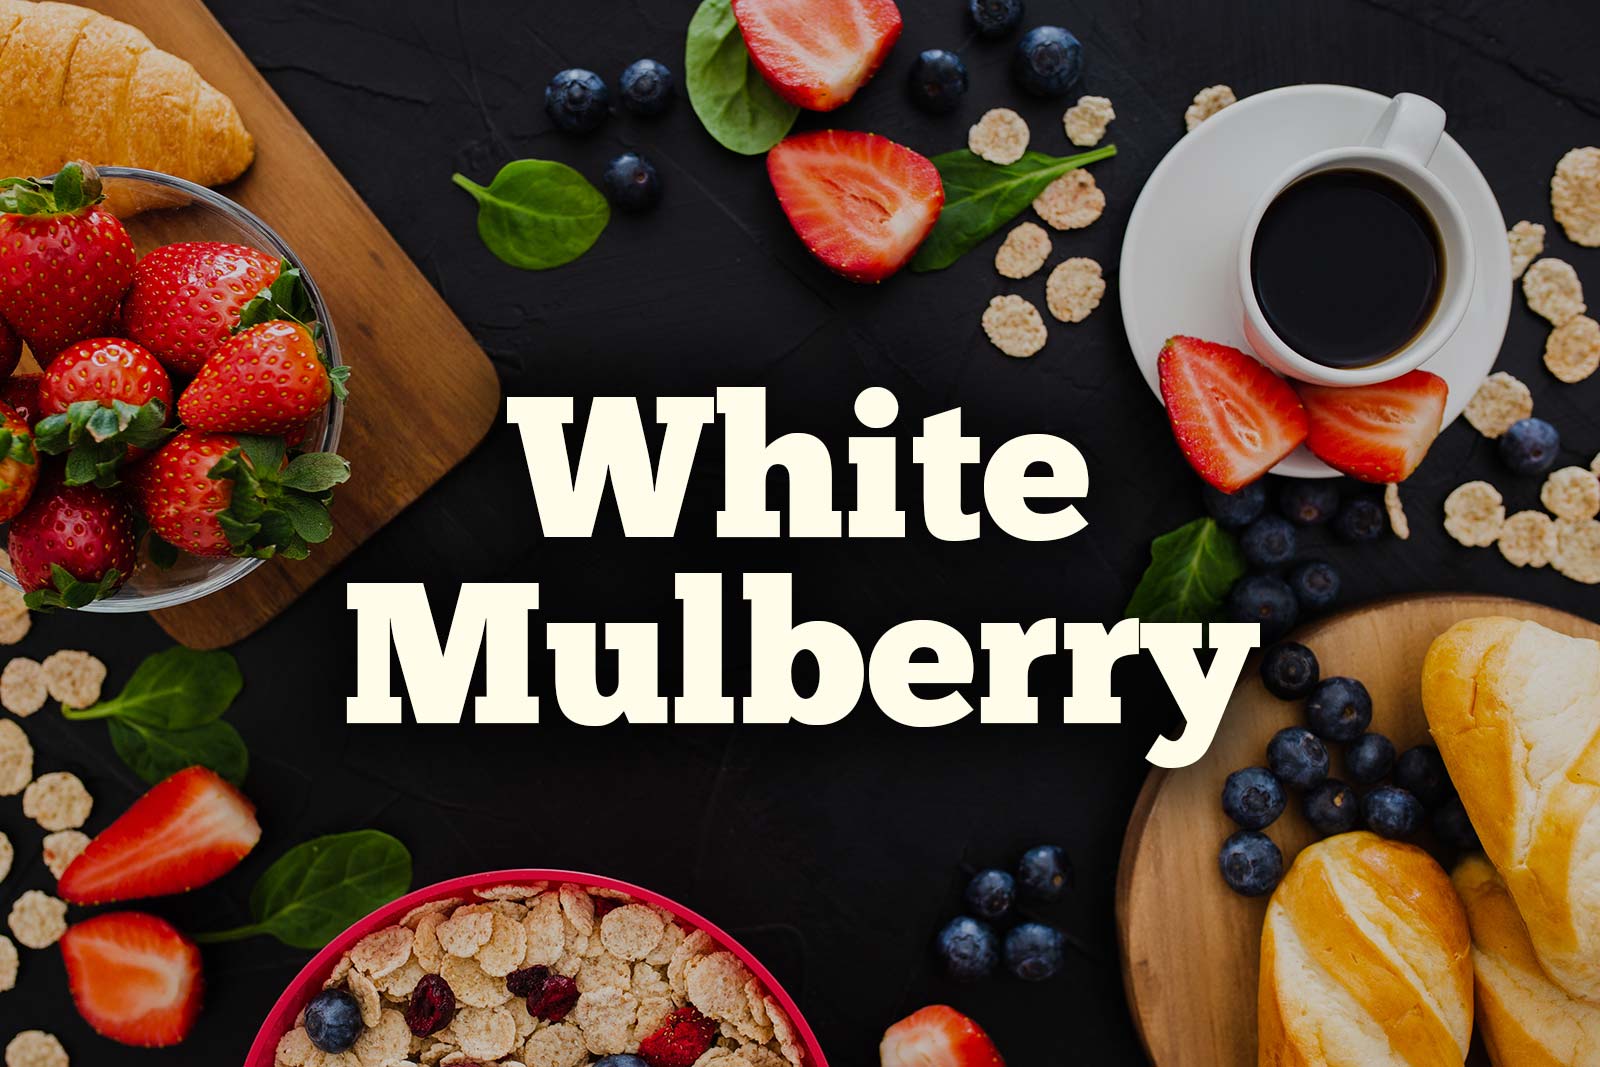 🍓 I’m Pretty Sure You Can’t Identify at Least 15/21 of These Berries Background White Mulberry